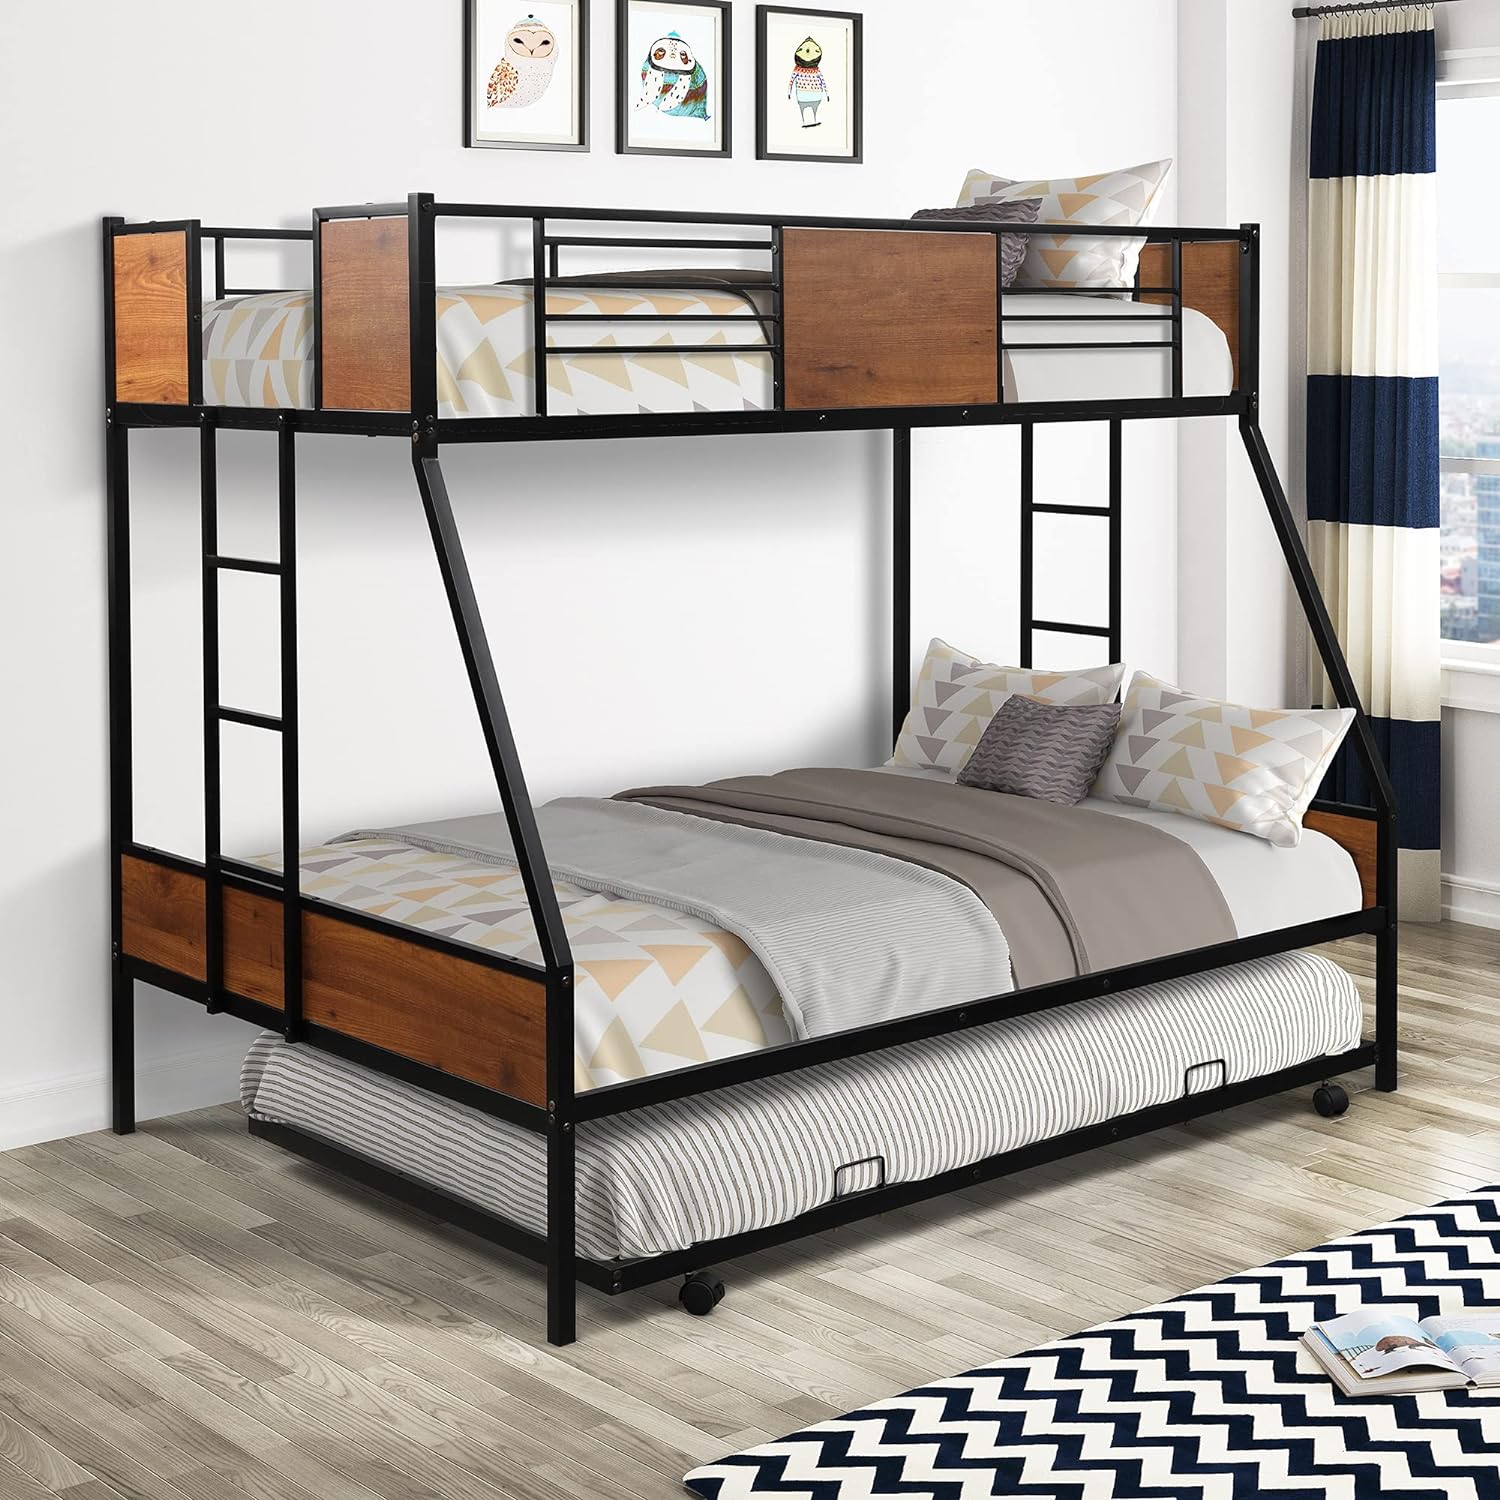 Wood Bunk Bed with Ladder Twin Over Twin/No Box Spring Needed/Space-Saving Design/Kids Bed 